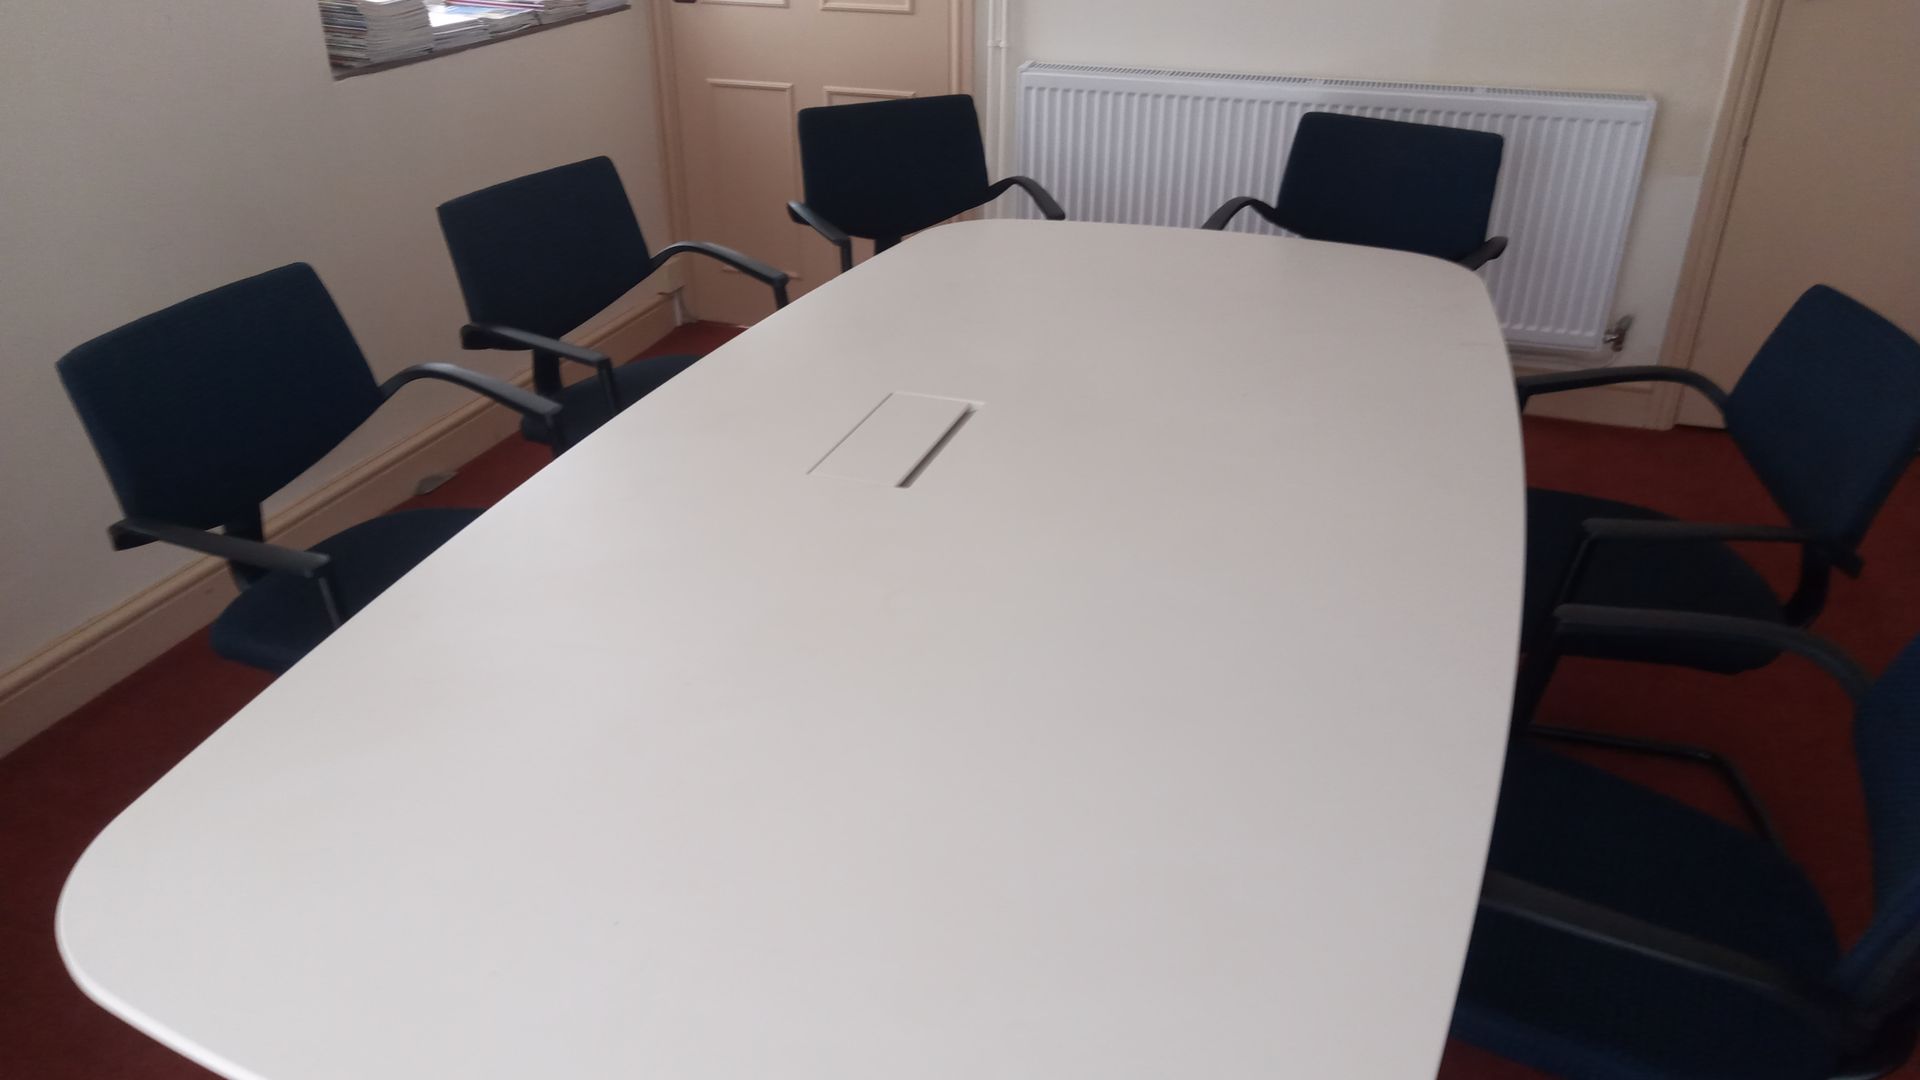 New office furniture at Reusefully